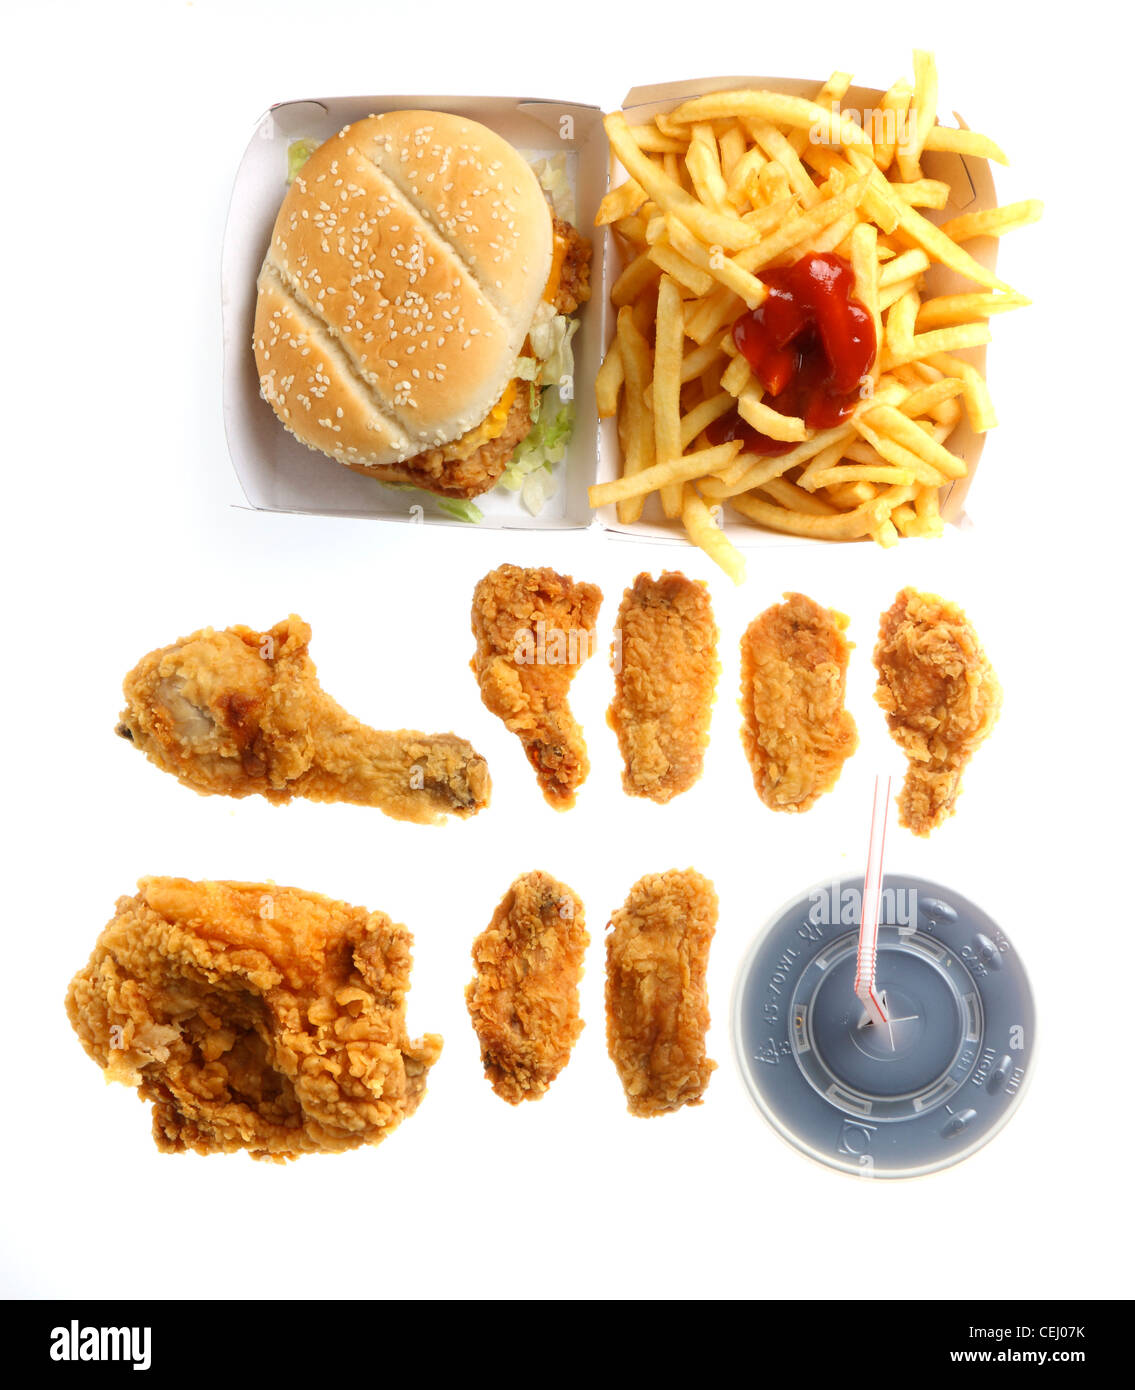 Fast food, nutrition. Different fast food products. Burger, French fries, chicken nuggets, KFC, Kentucky Fried Chicken products. Stock Photo